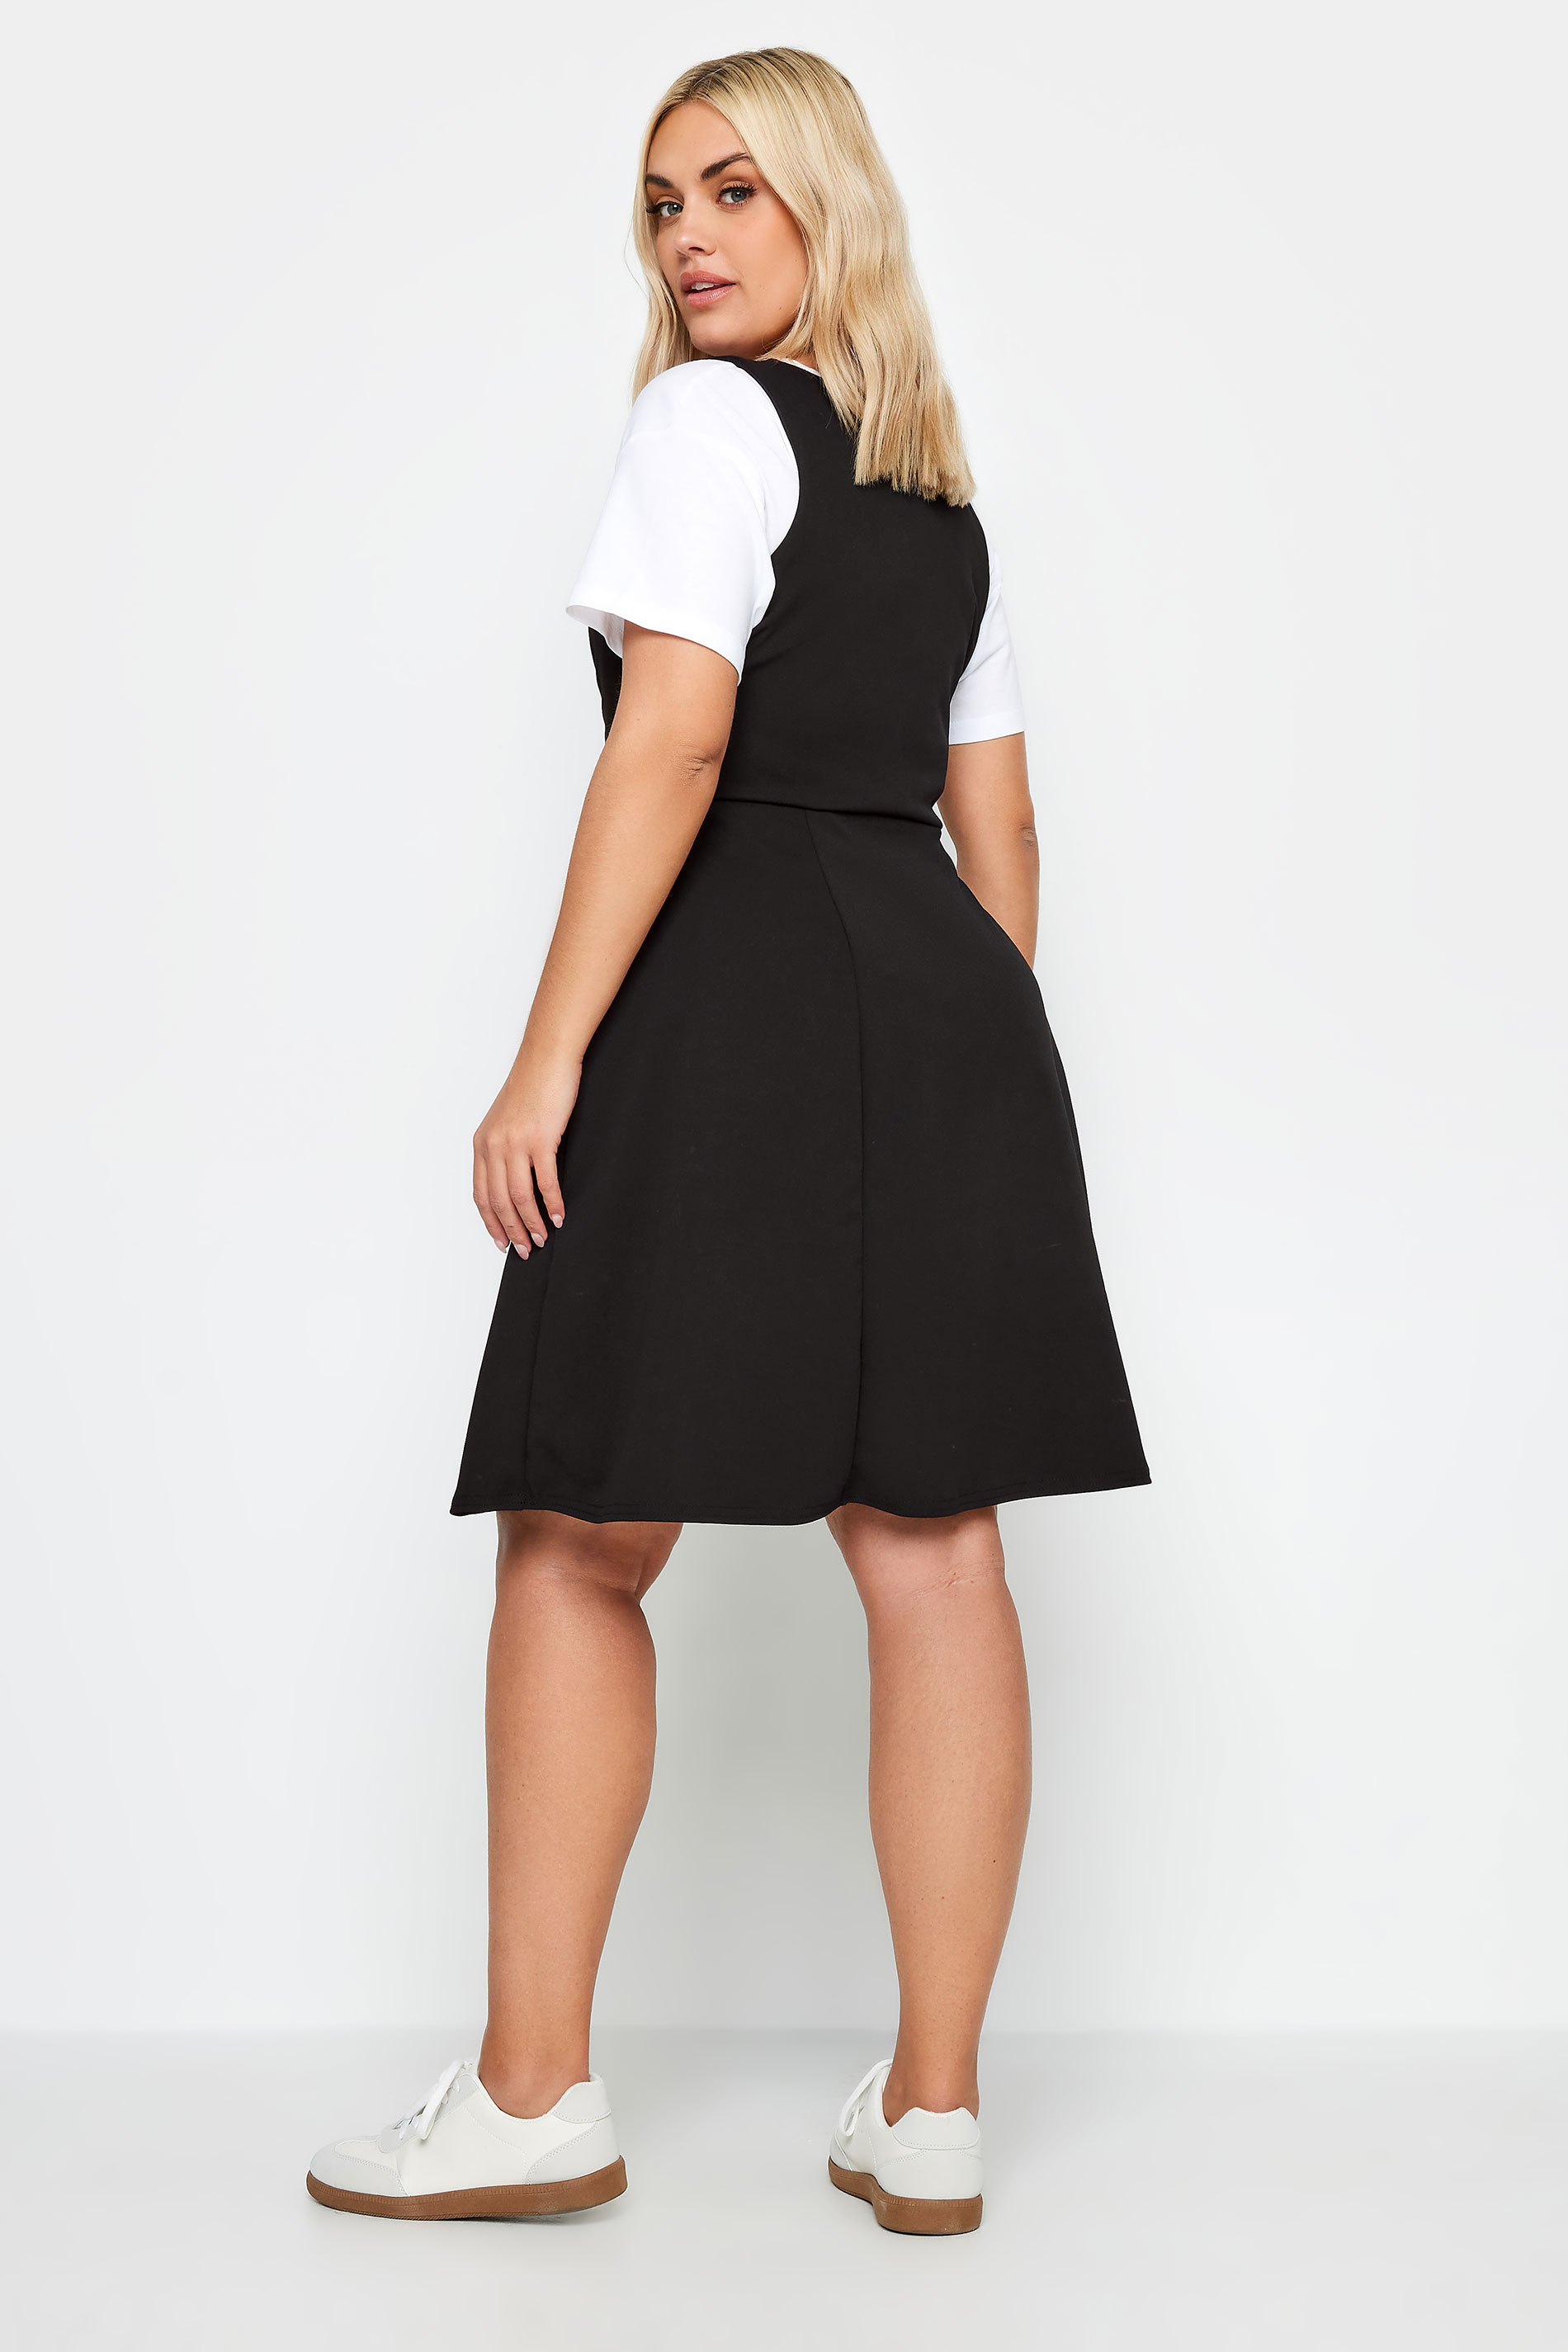 LIMITED COLLECTION Plus Size Black Square Neck Pinafore Dress | Yours Clothing 3